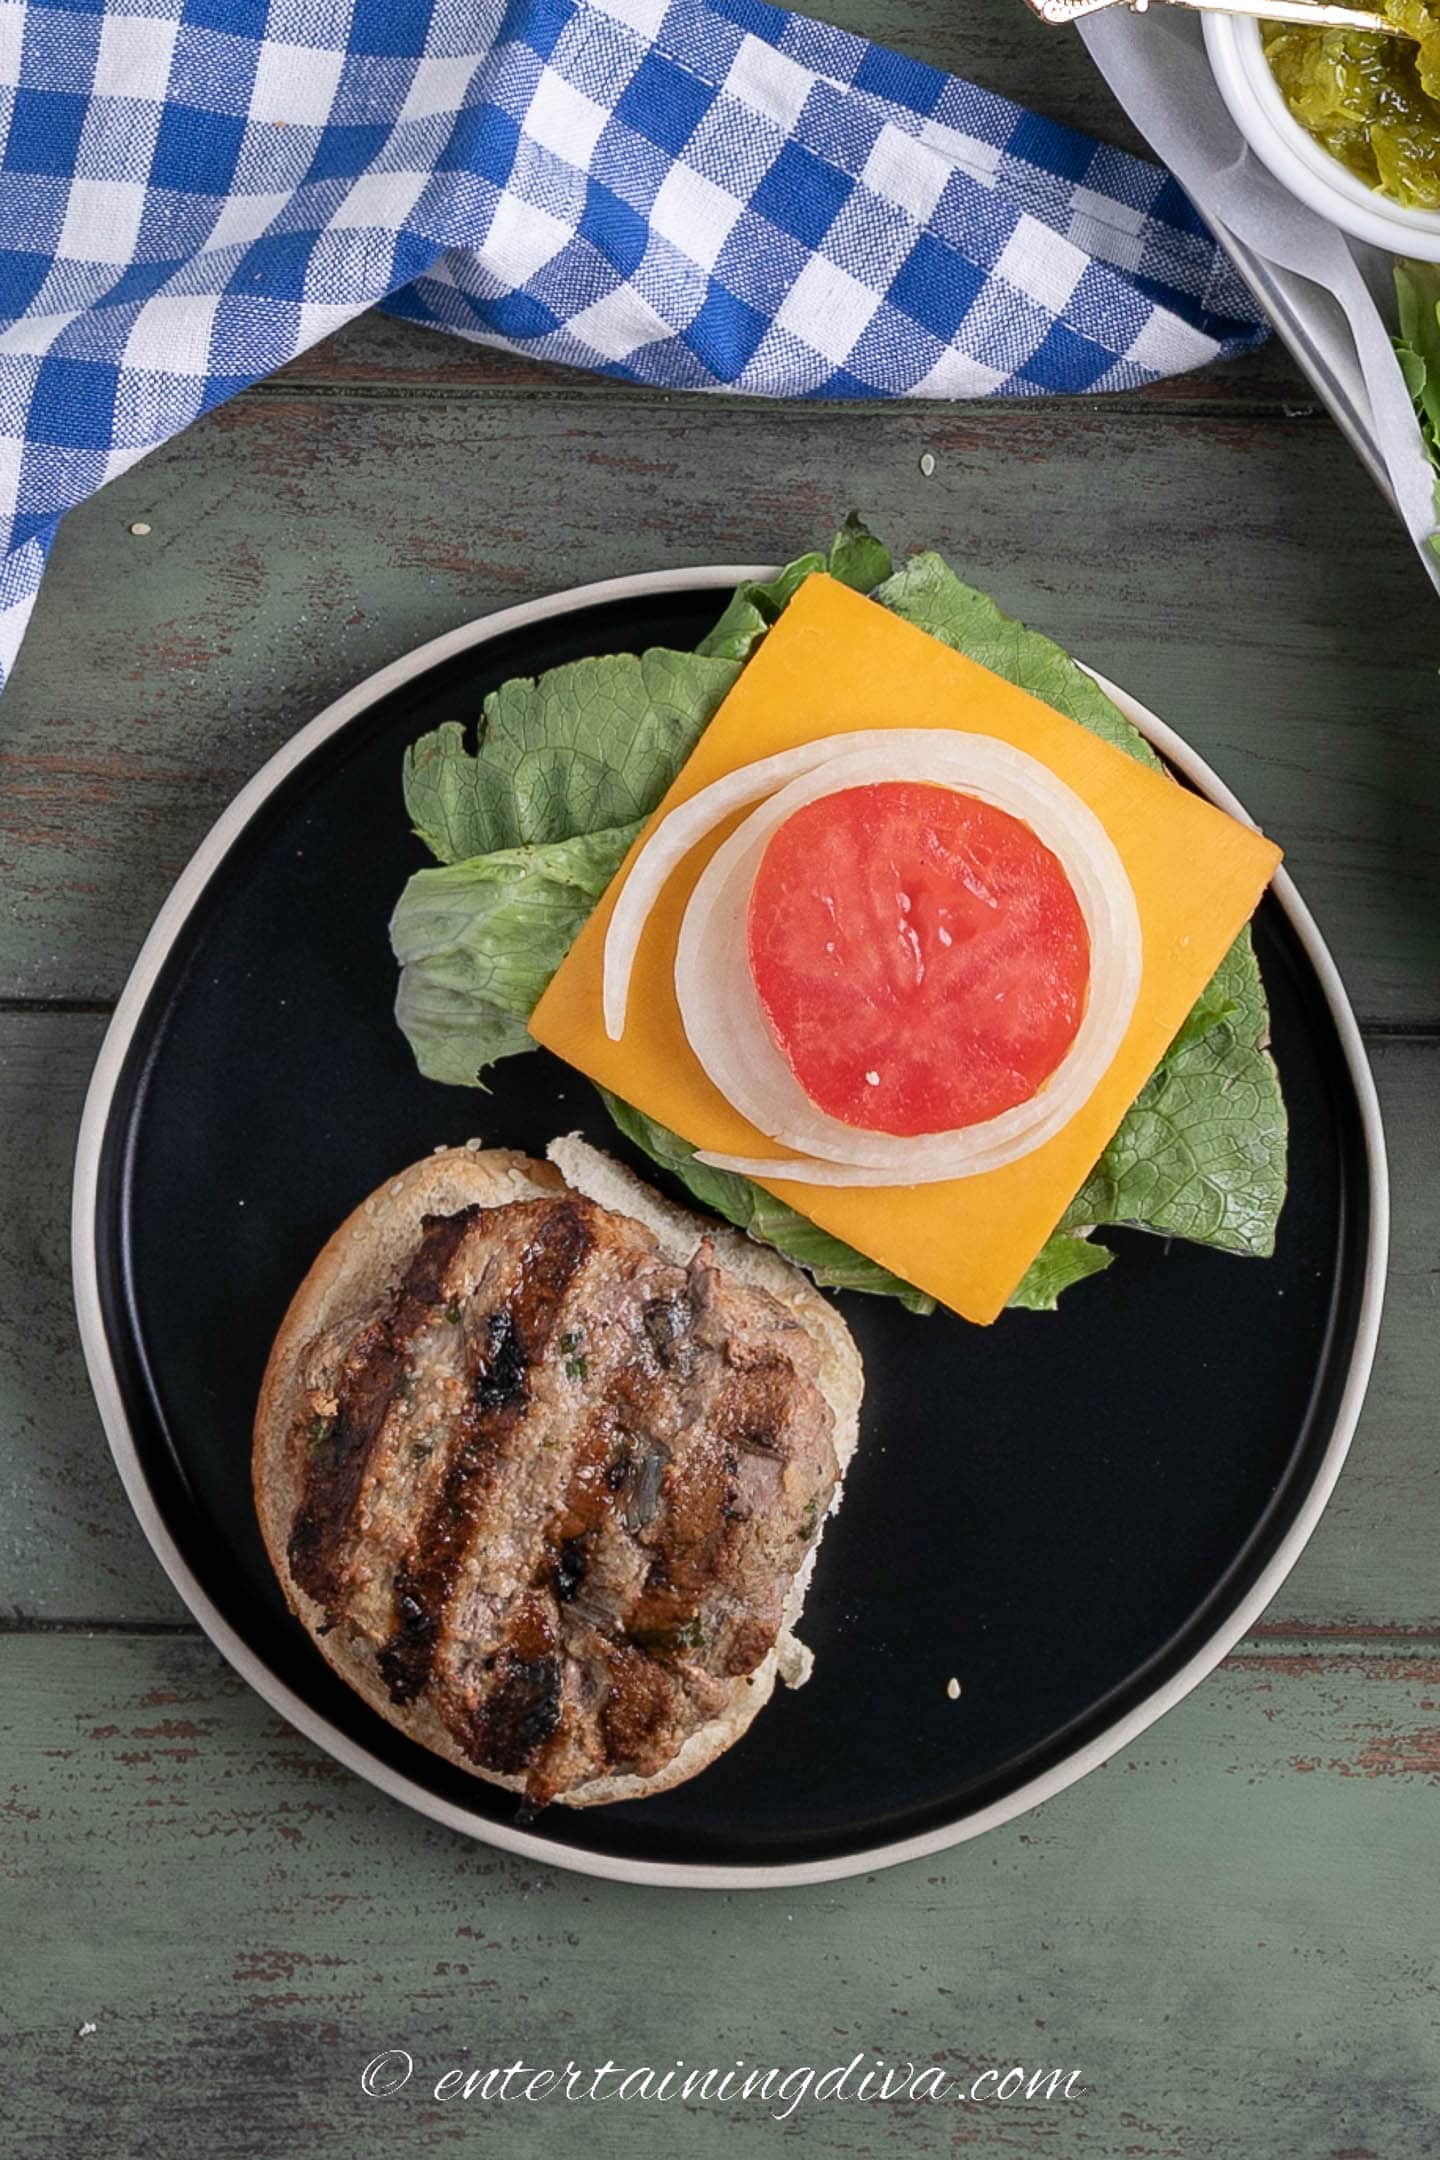 A grilled pesto turkey burger with the bun opened and lettuce, cheese, tomato and onion on it.